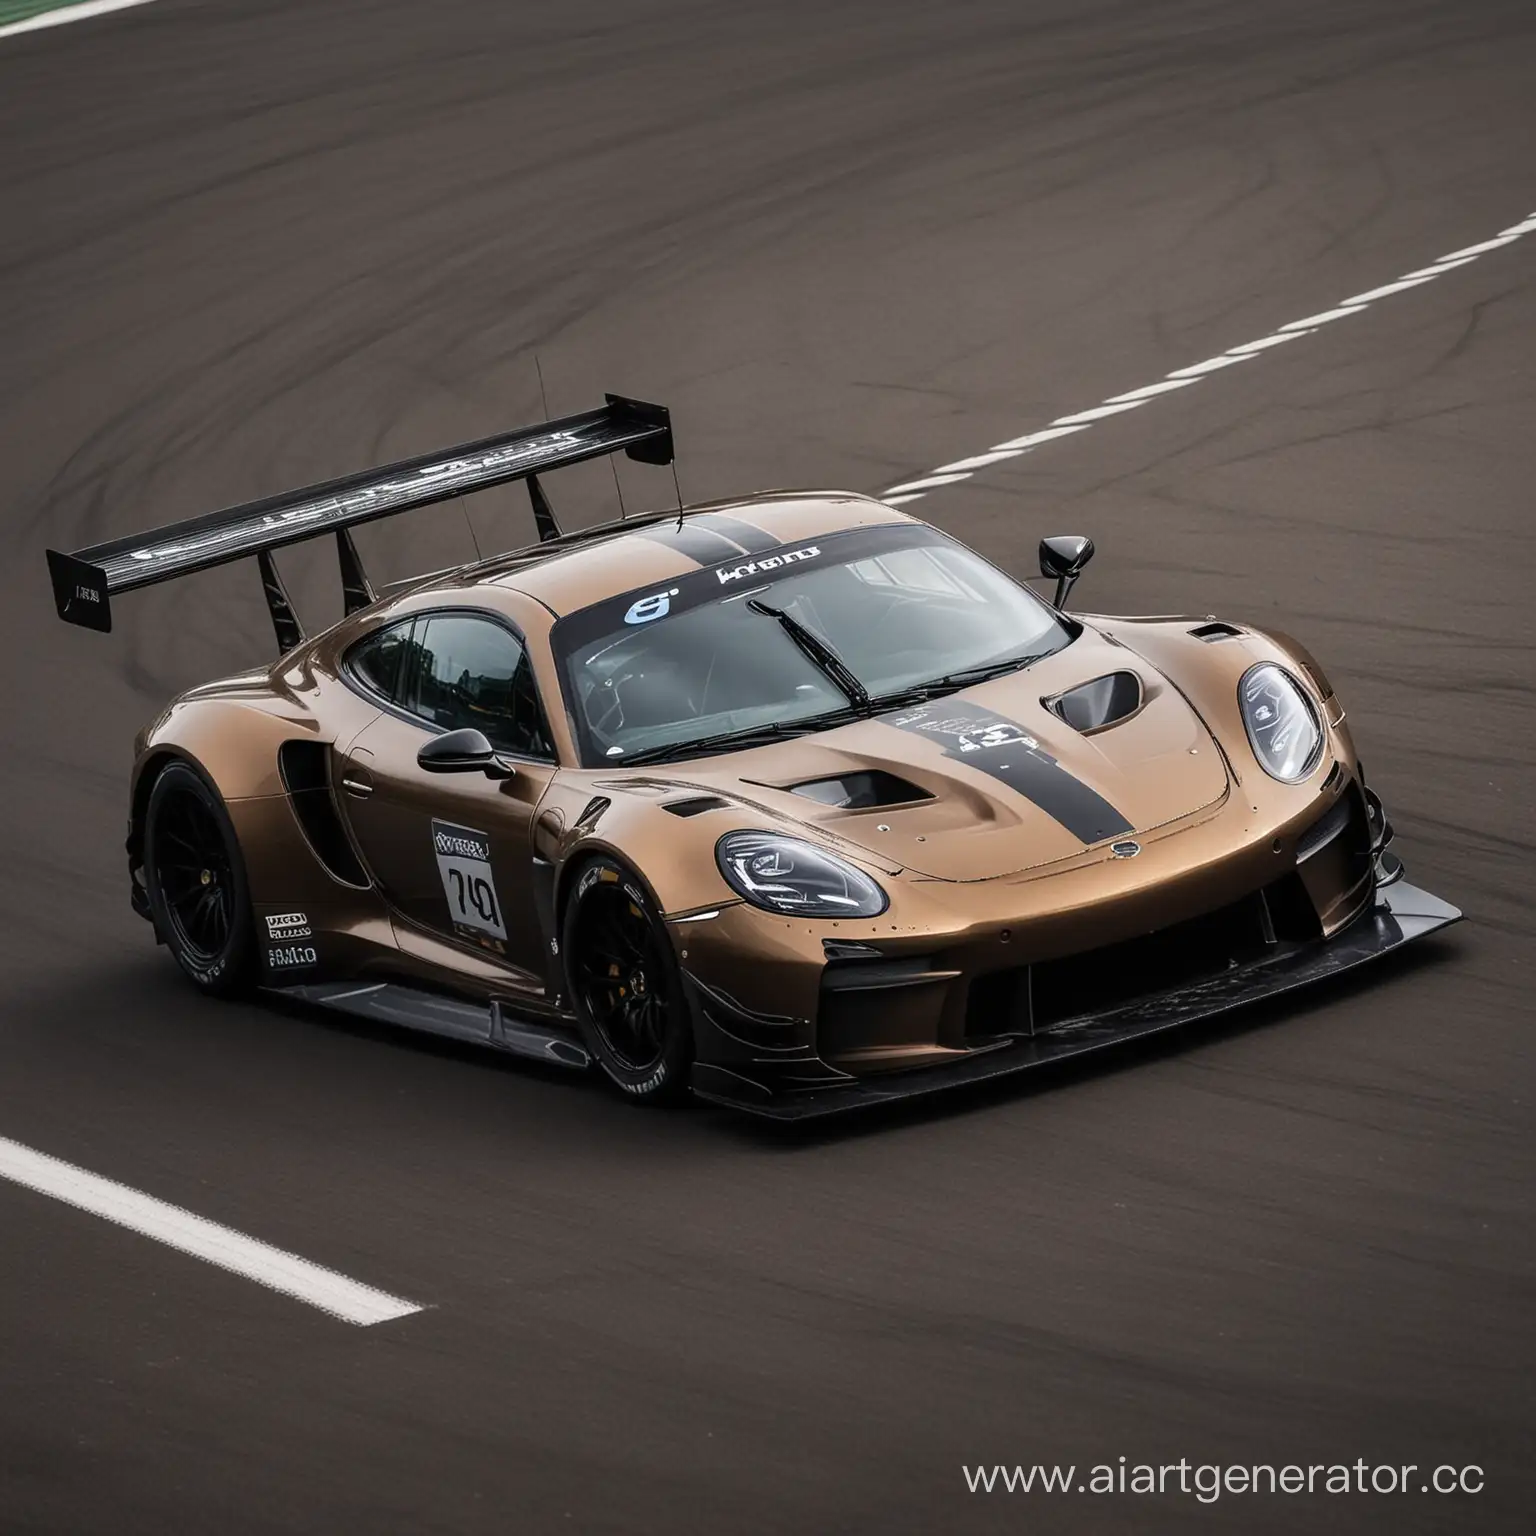 racing car, gt3, gunbronze and black livery, cool and dark, on track